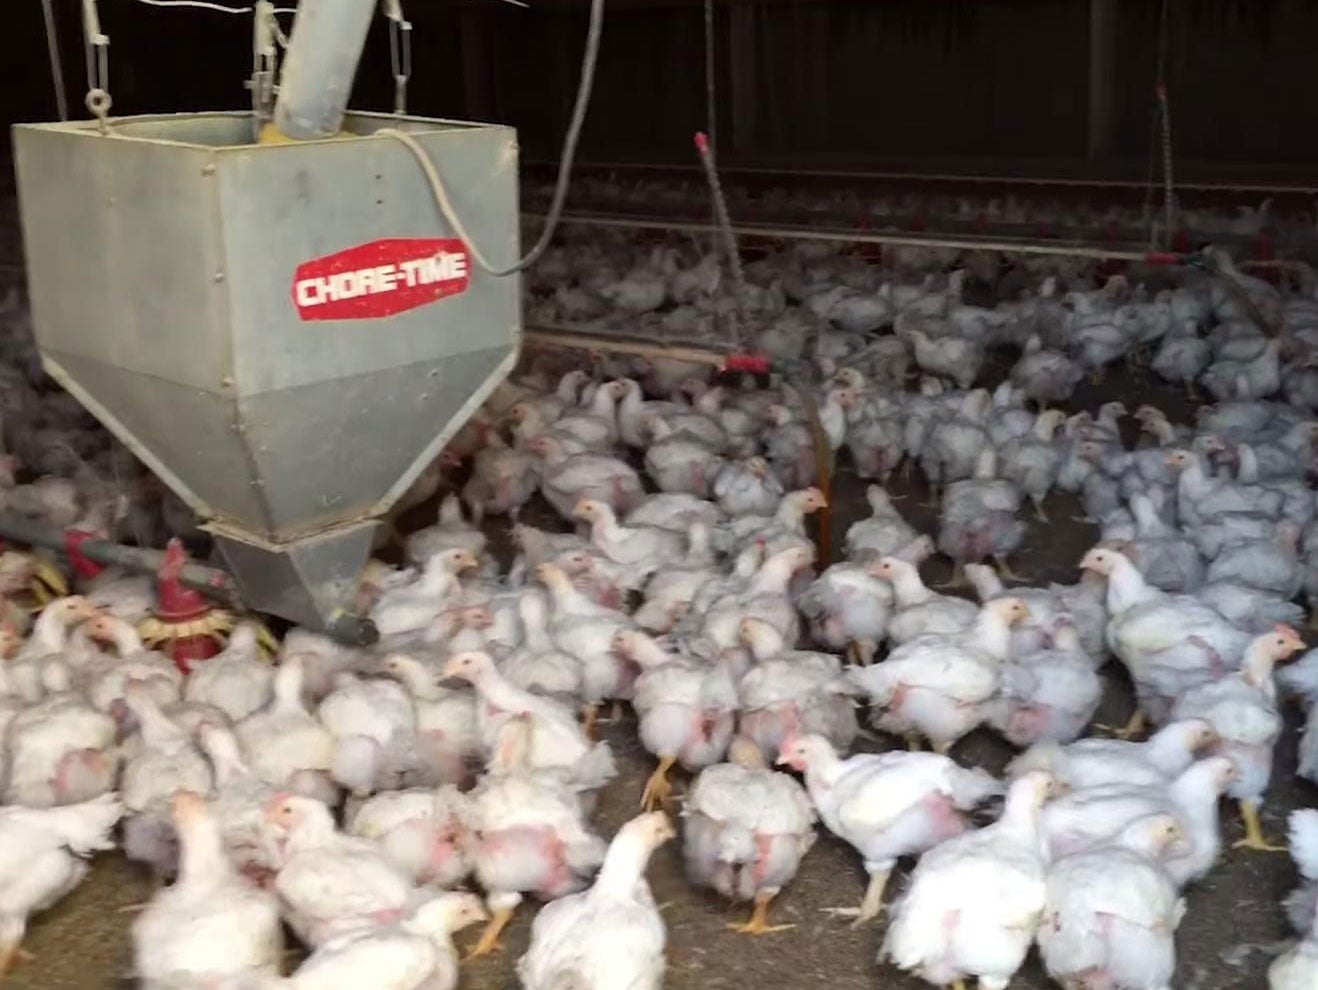 Chickens were filmed being mistreated at Foster Farms facilities in California